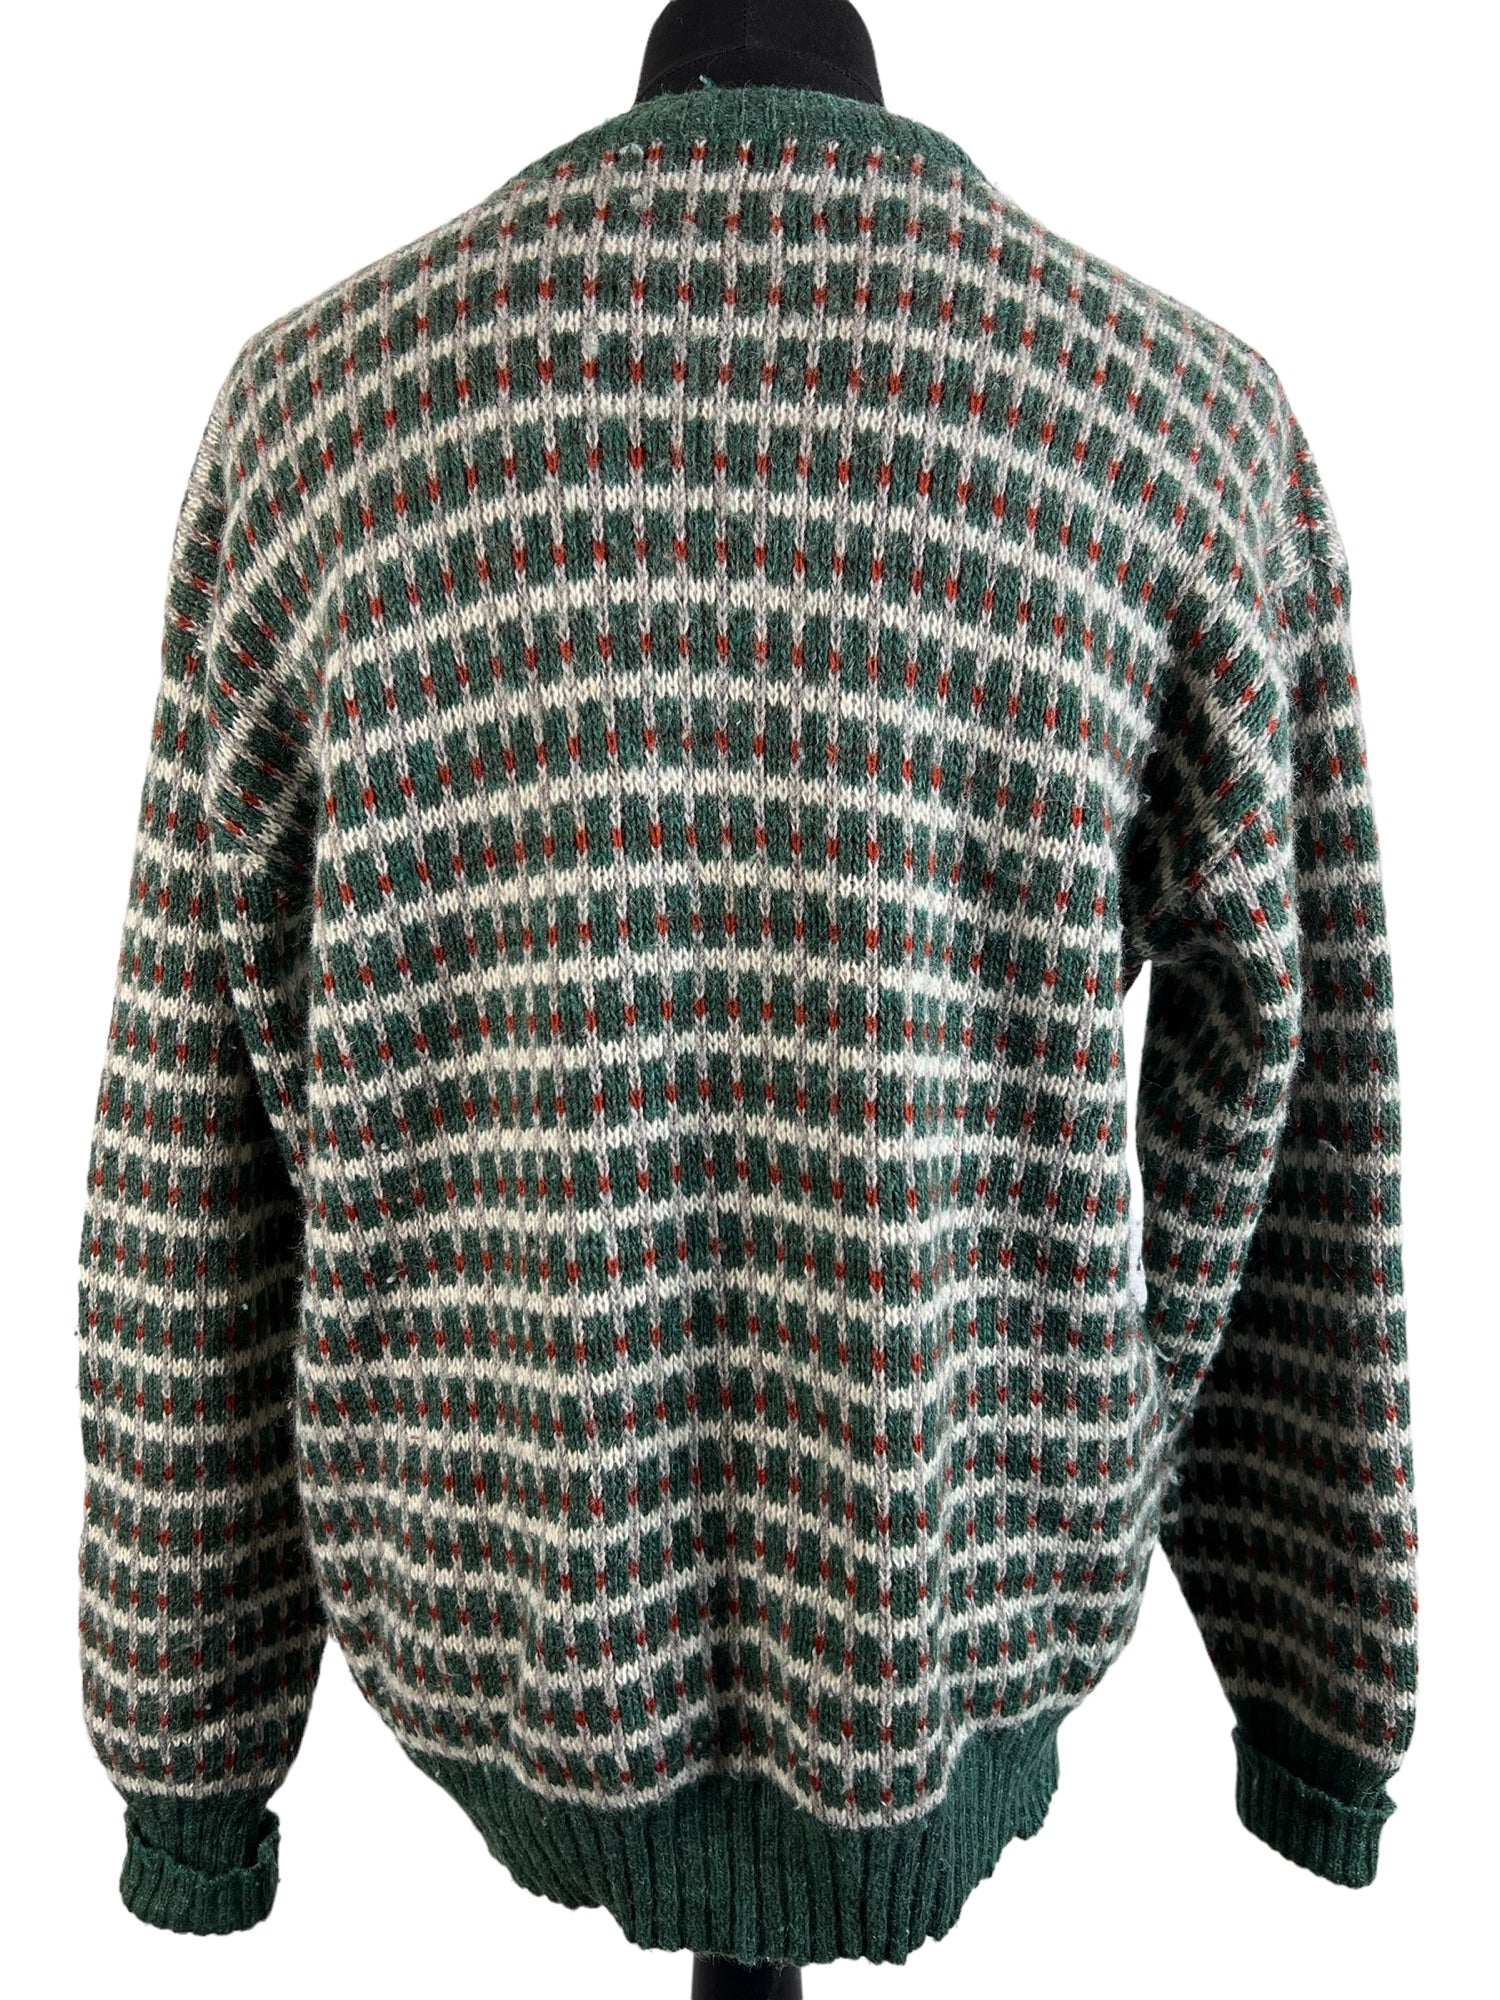 XL  Wool Blend  warm jumper  vintage  Urban Village Vintage  urban village  thick  sweater  scandinavian  scandi  patterned  pattern  mens  Made in Norway  long sleeve  knitwear  knitted  knit  Kaare Giese  icelandic  high neck  heavyweight  Green  christmas  checked  check  70s  1970s